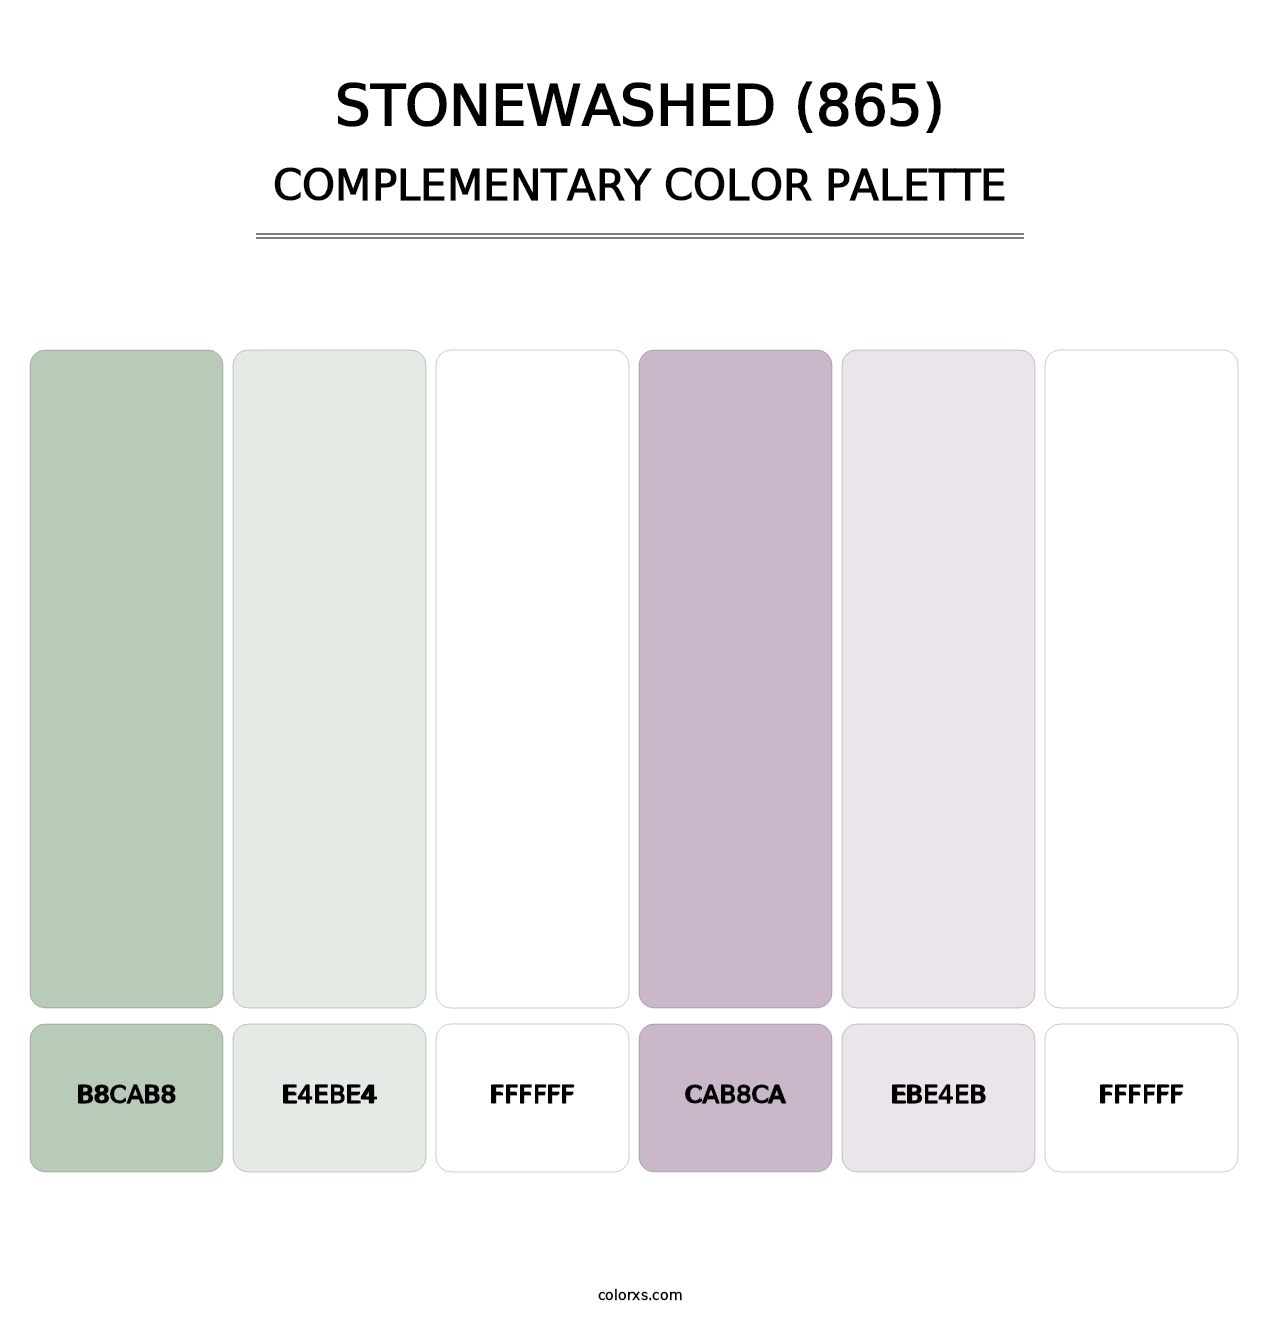 Stonewashed (865) - Complementary Color Palette